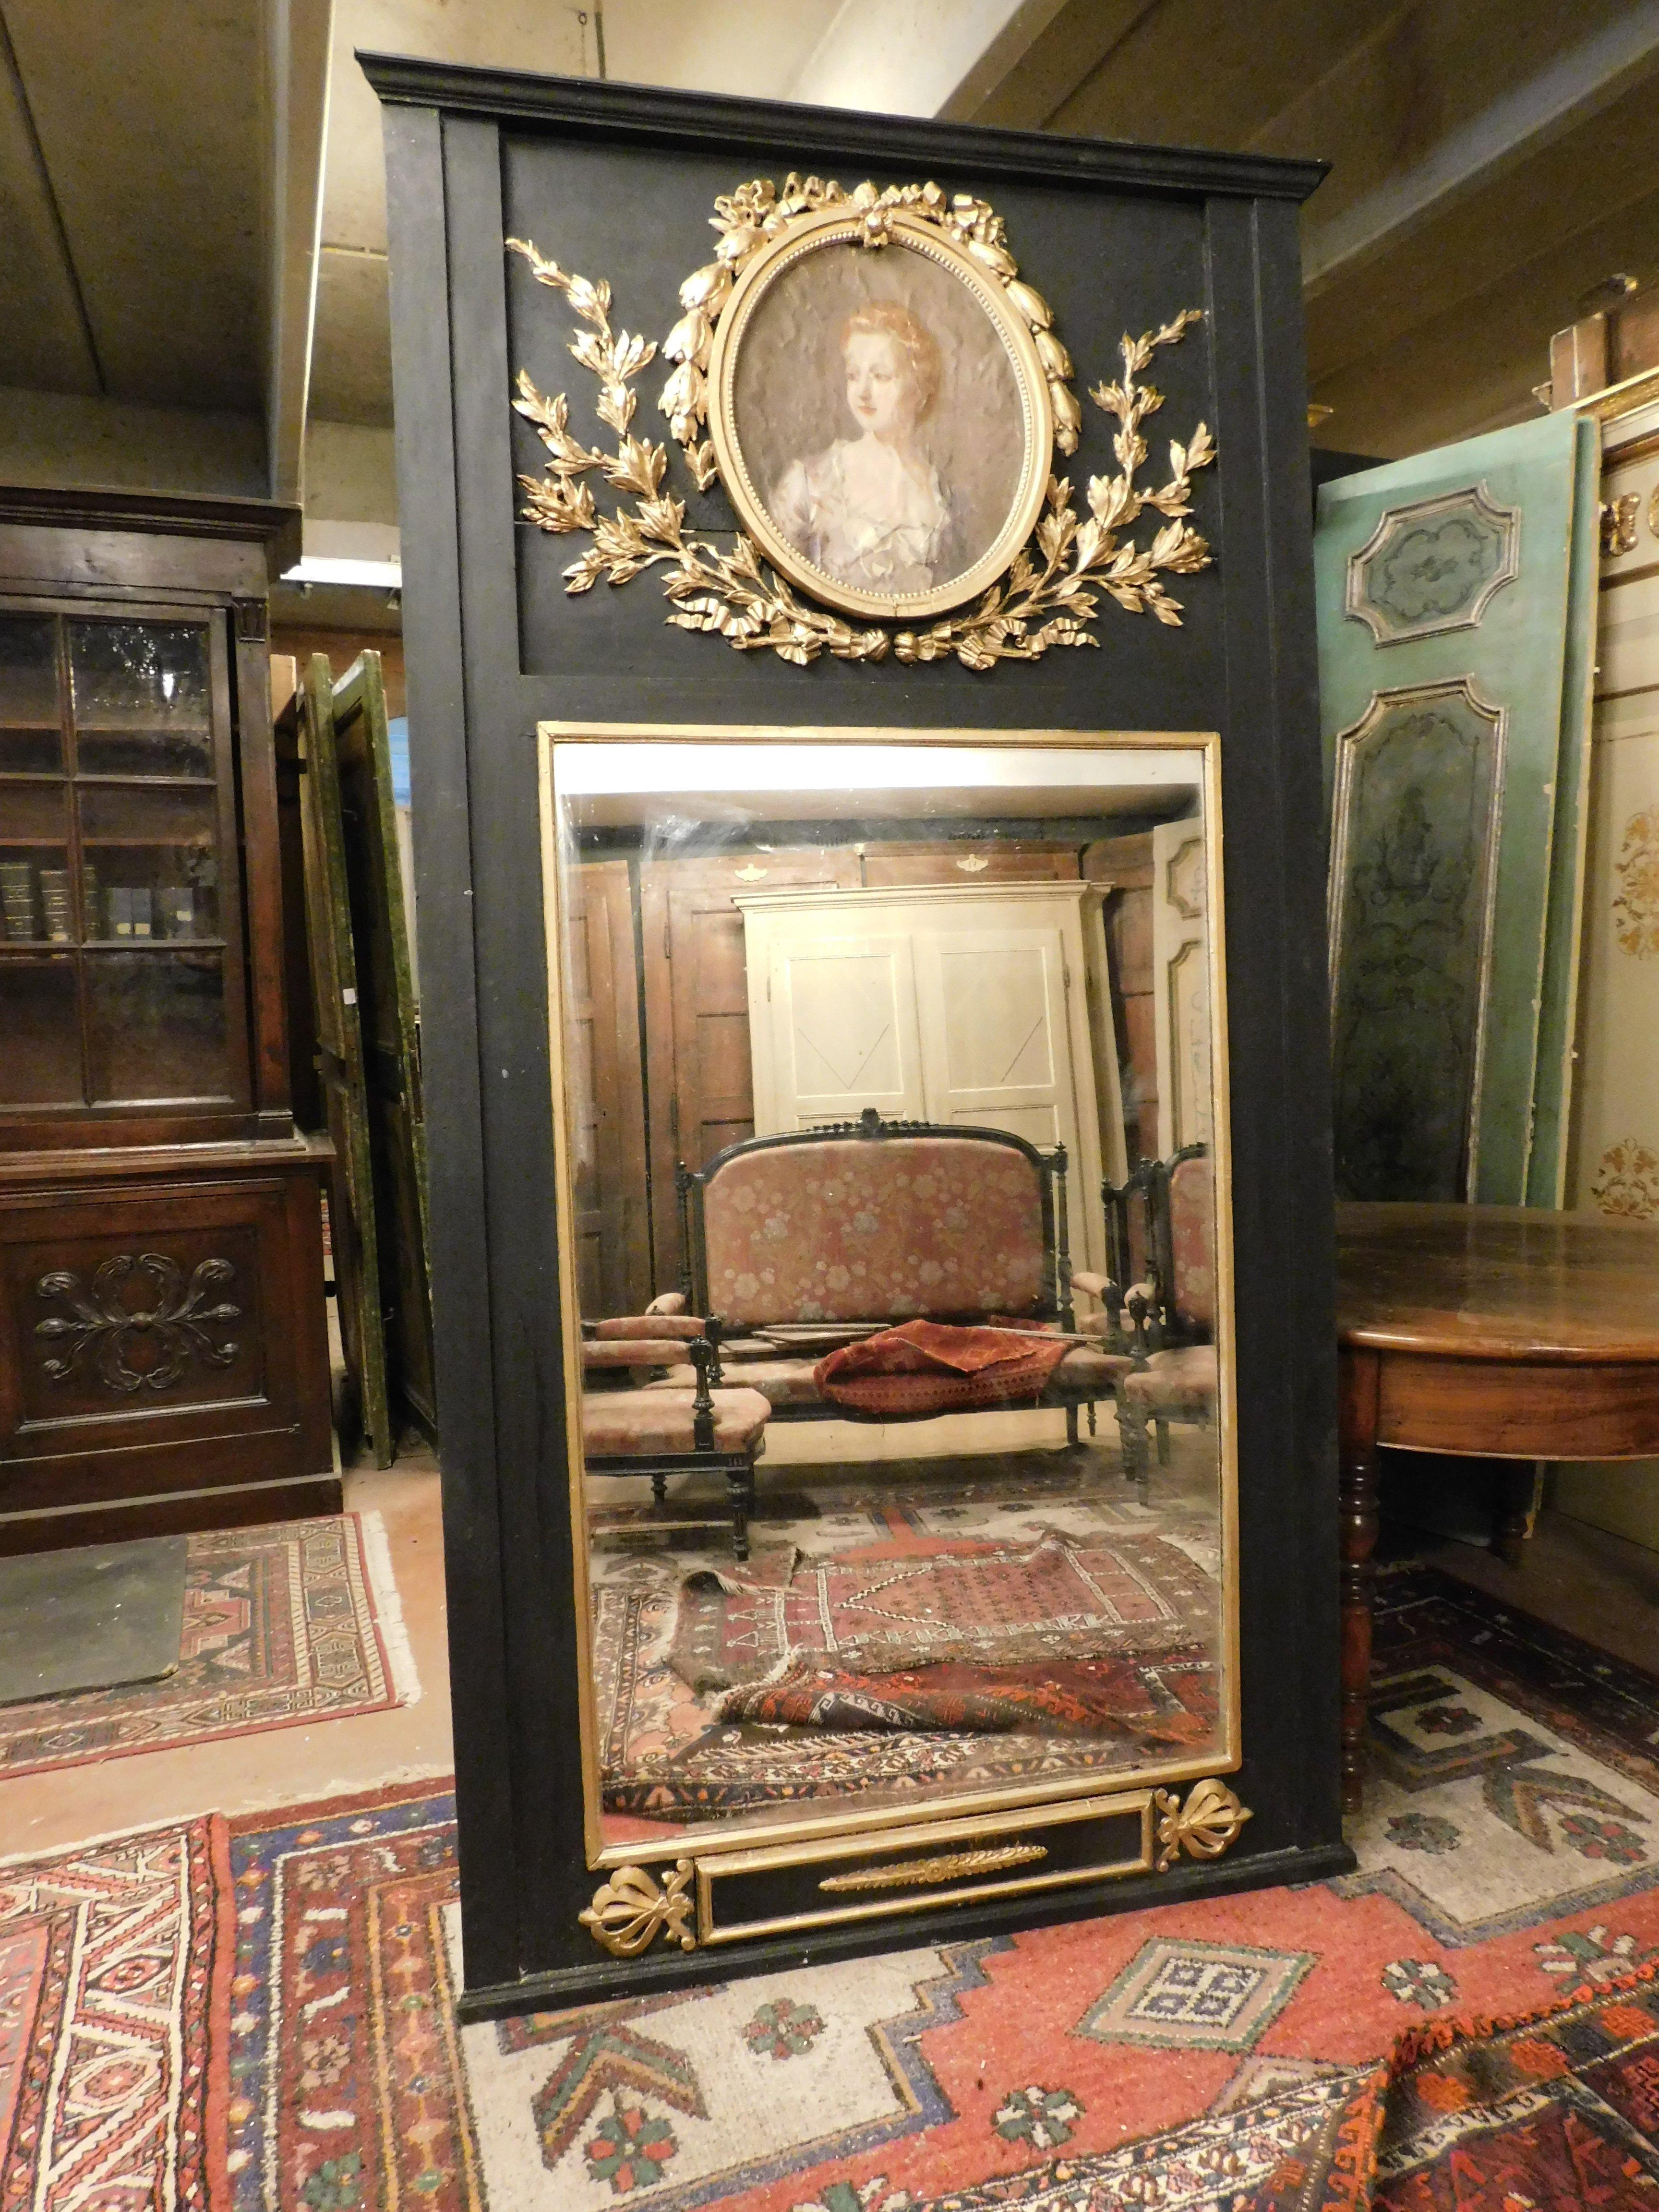 Ancient and large mirror, for fireplace or wall, carved in wood and lacquered on a black background, enriched with gilded carvings and painting depicting the female figure of a lady, tempera on paper, built in the 19th century in Italy, retro and